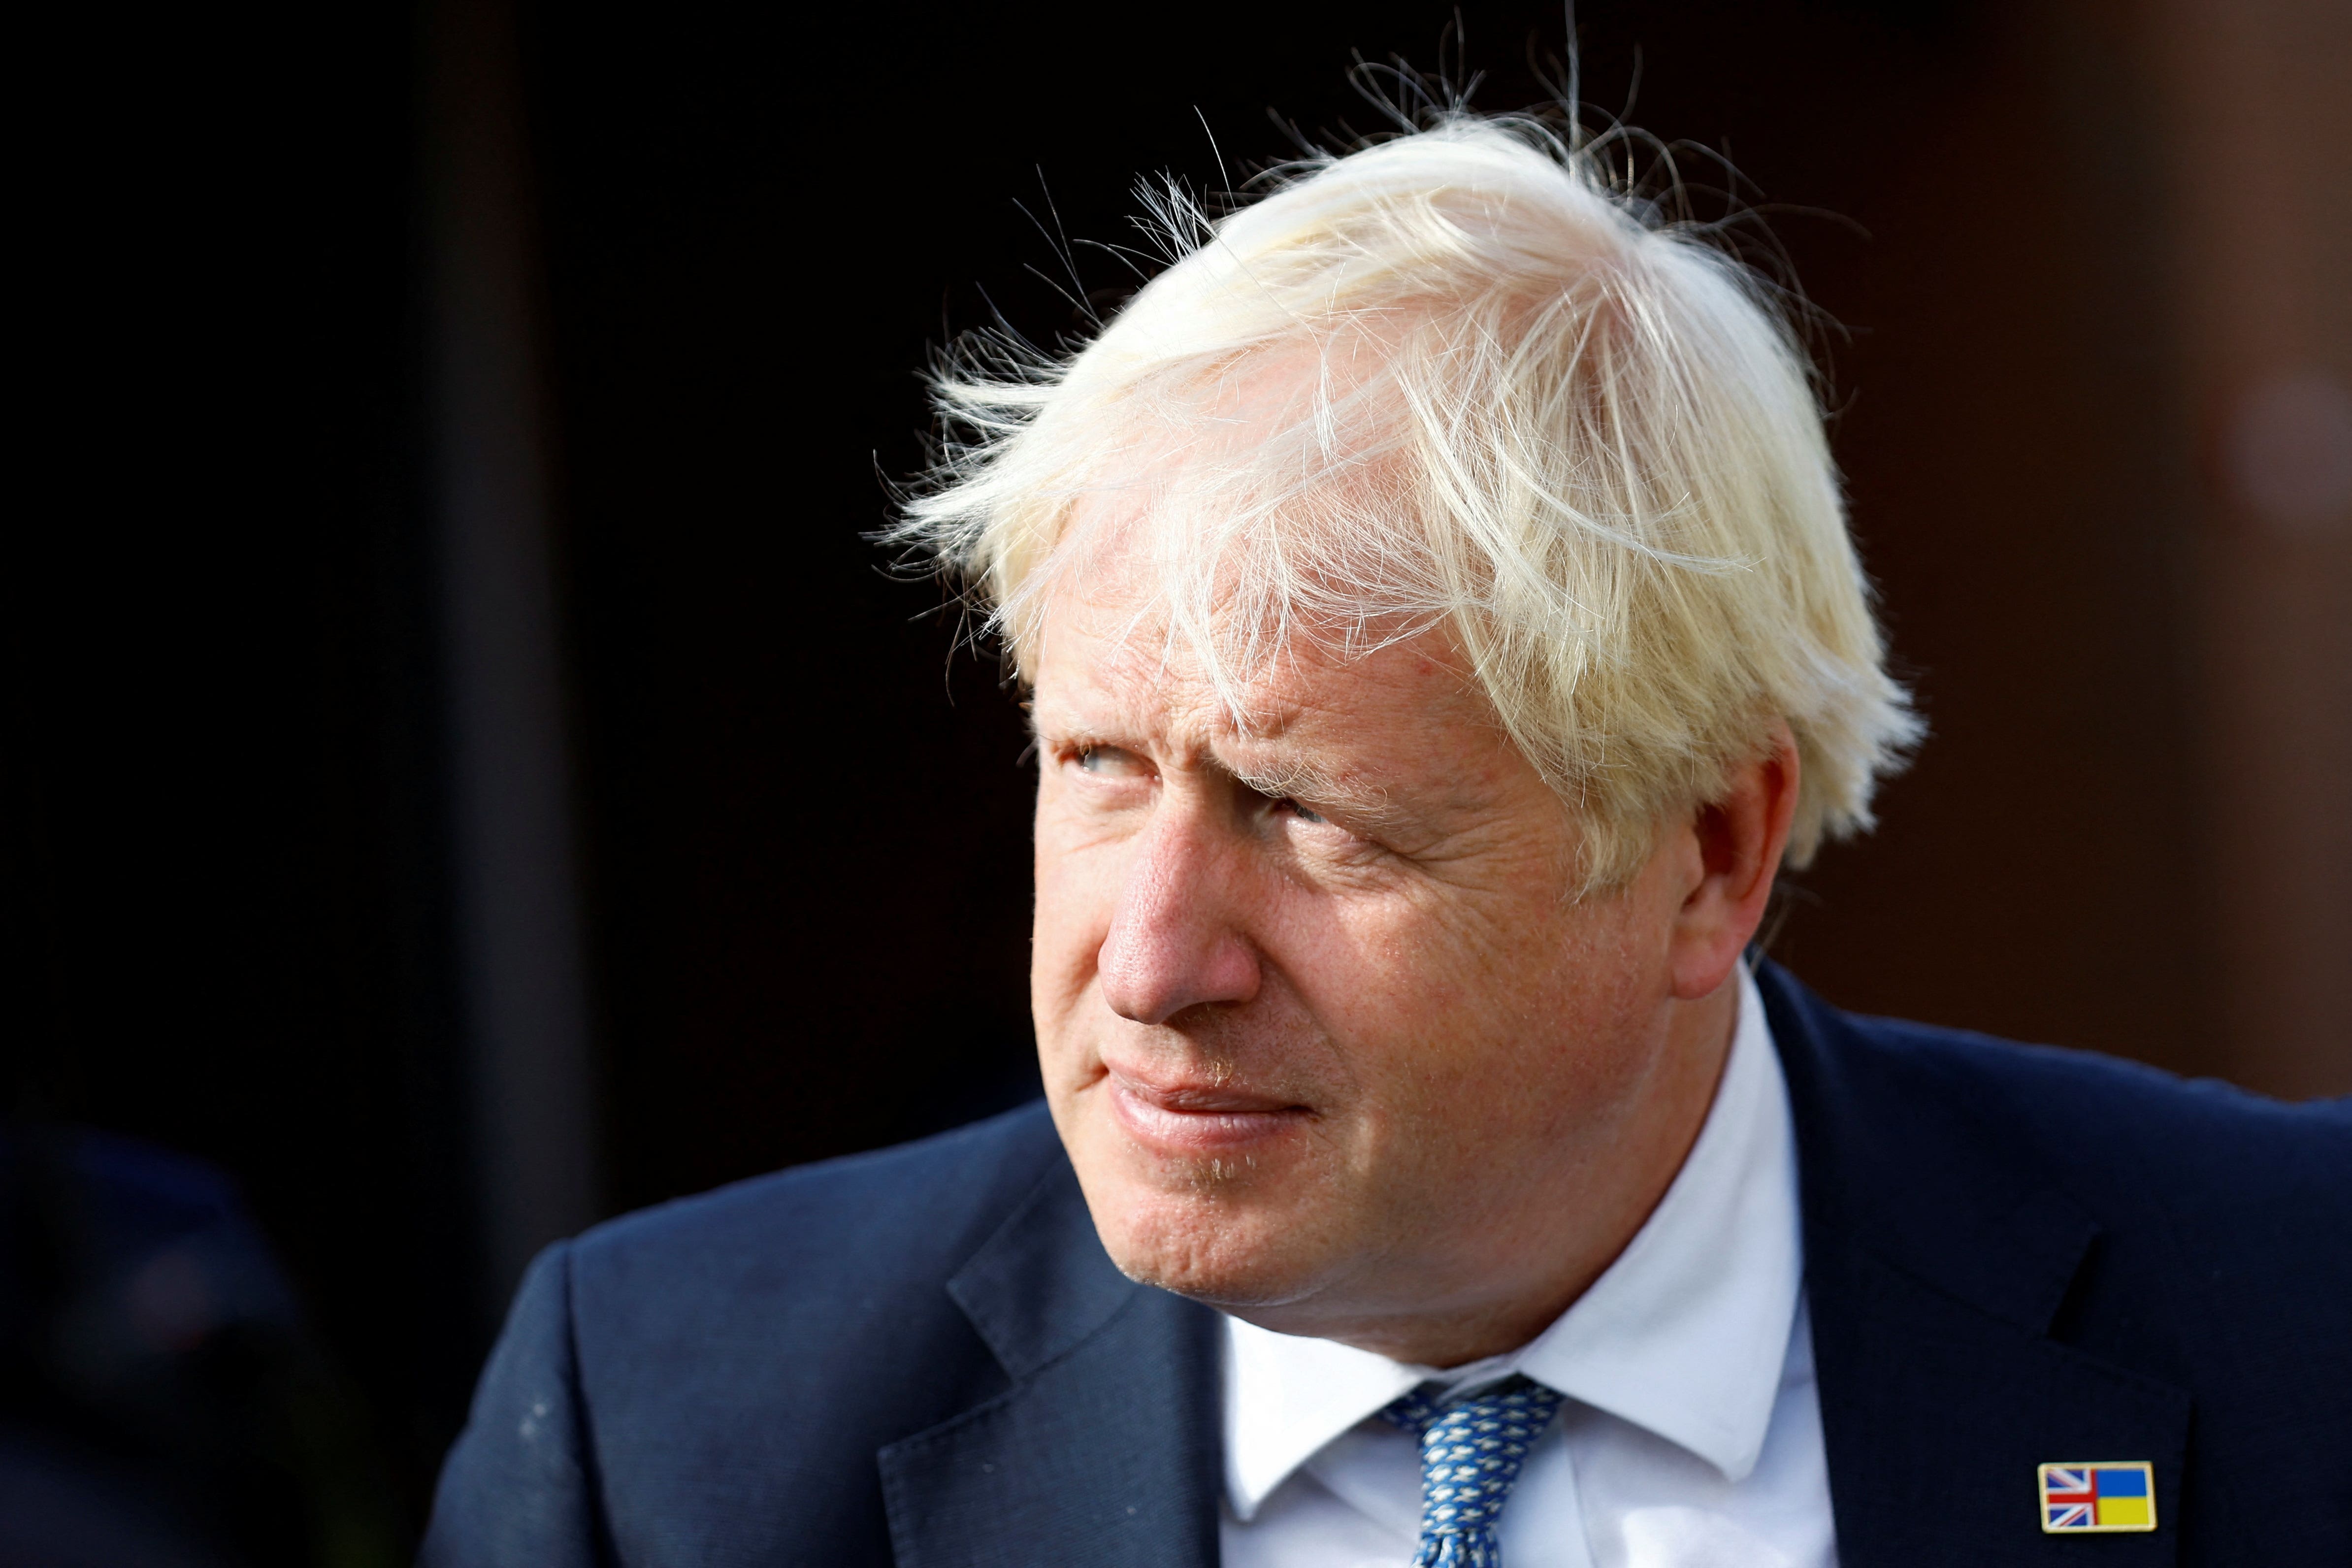 The Cabinet Office has told the official Covid-19 inquiry that Boris Johnson’s notebooks ‘may involve issues of national security’